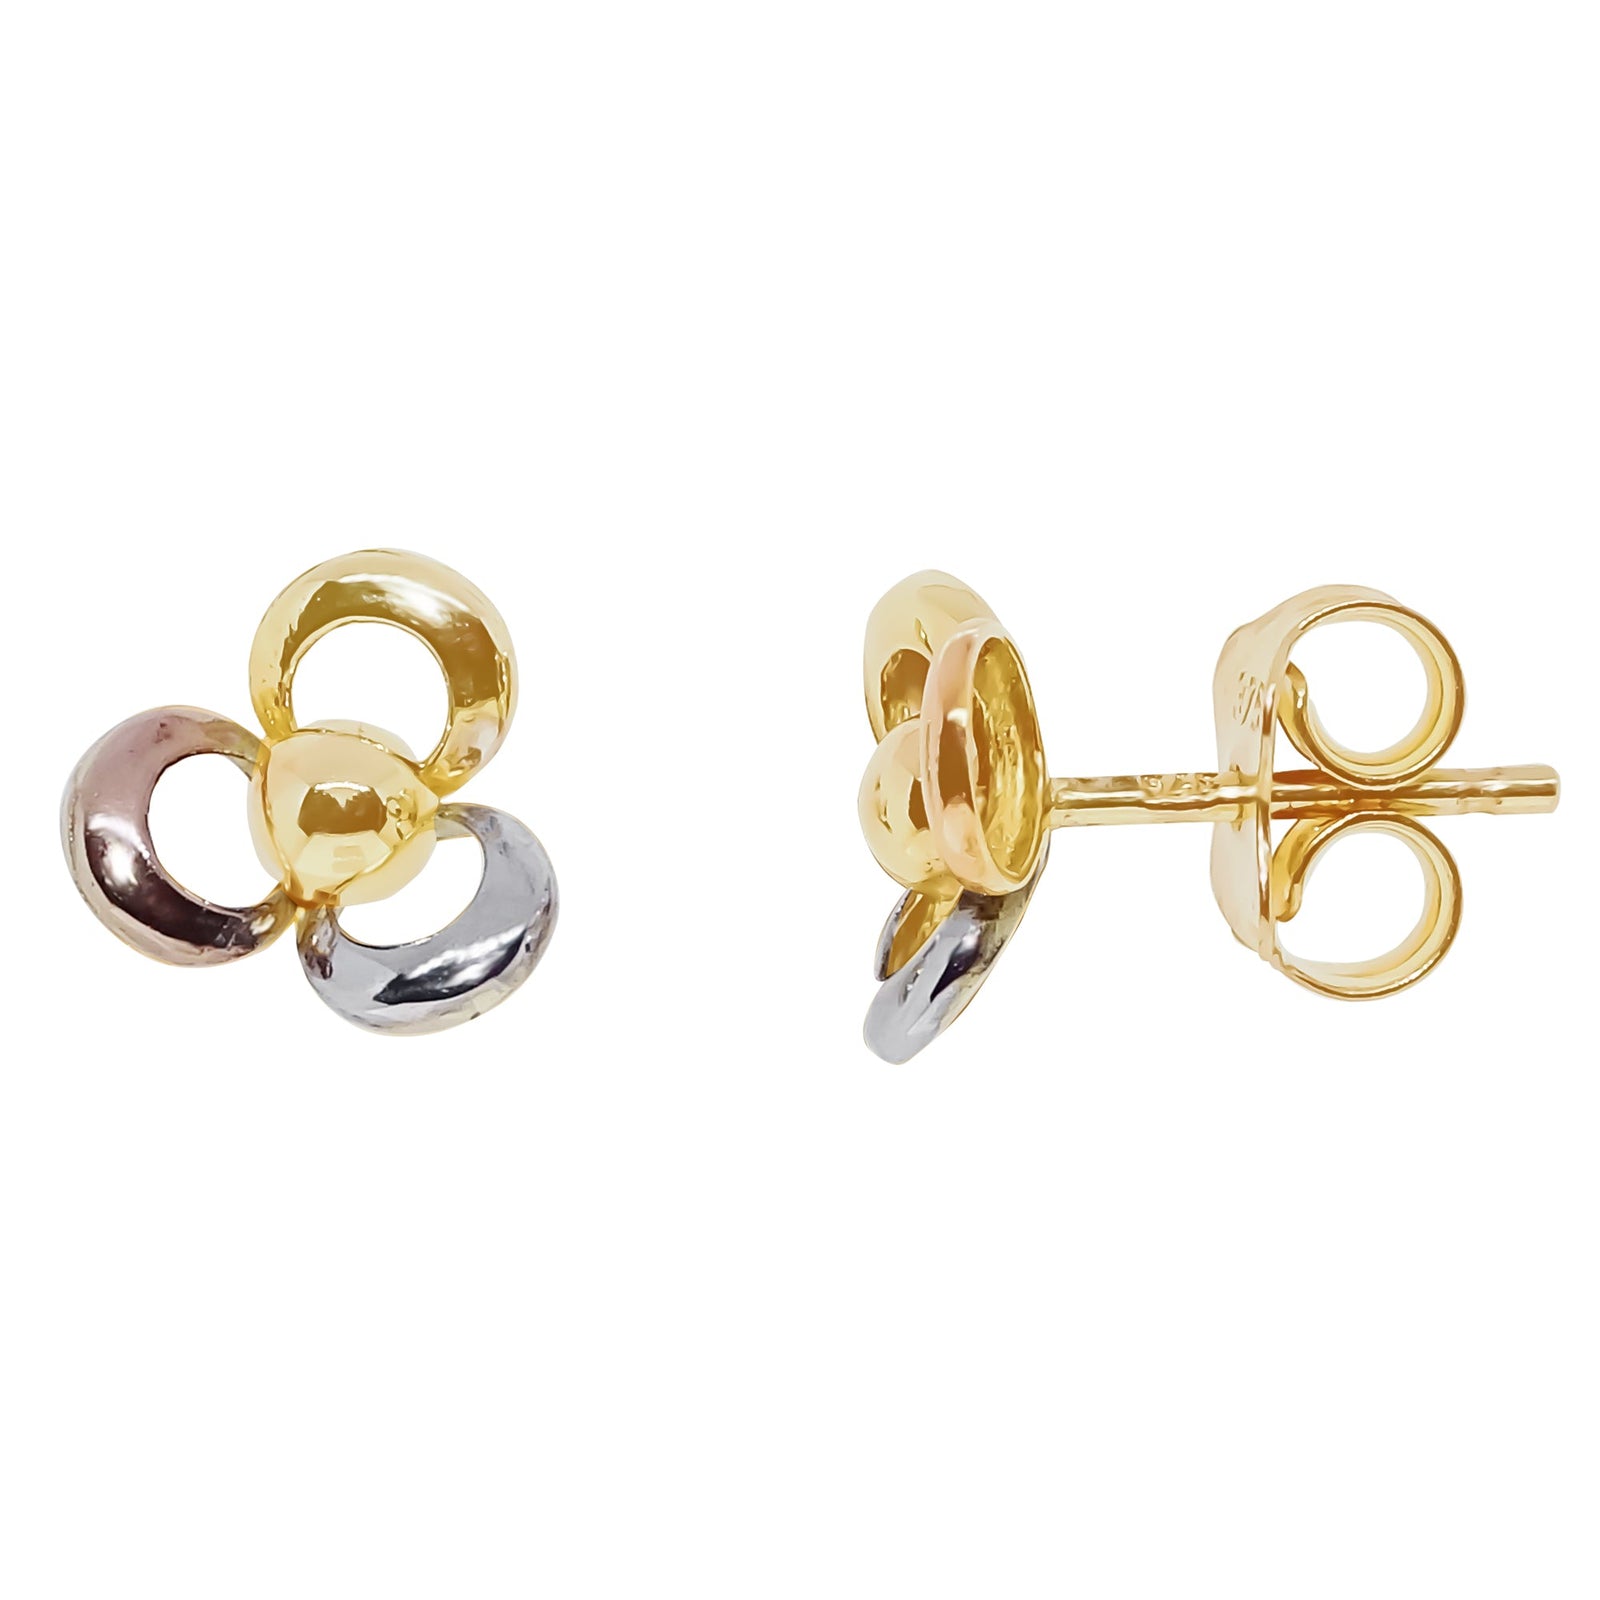 9ct 3 colour gold stud earrings